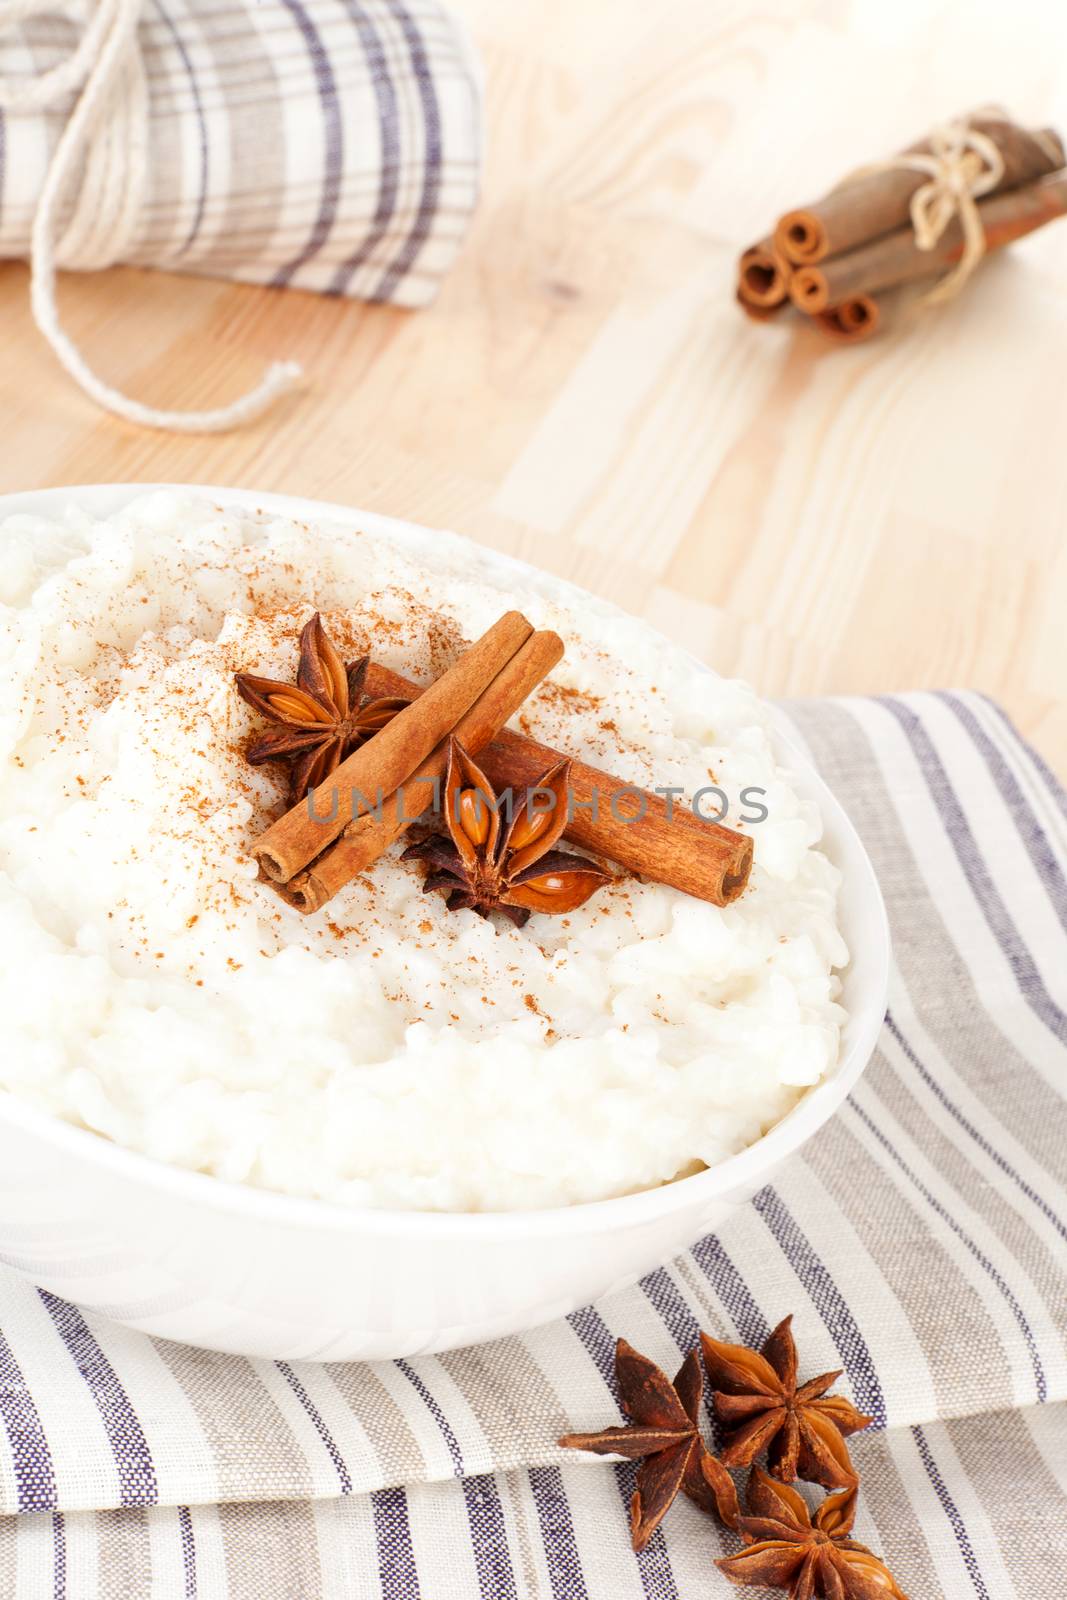 Culinary rice pudding with cinnamon and star anise garnish in white bowl. Delicious vegetarian food.